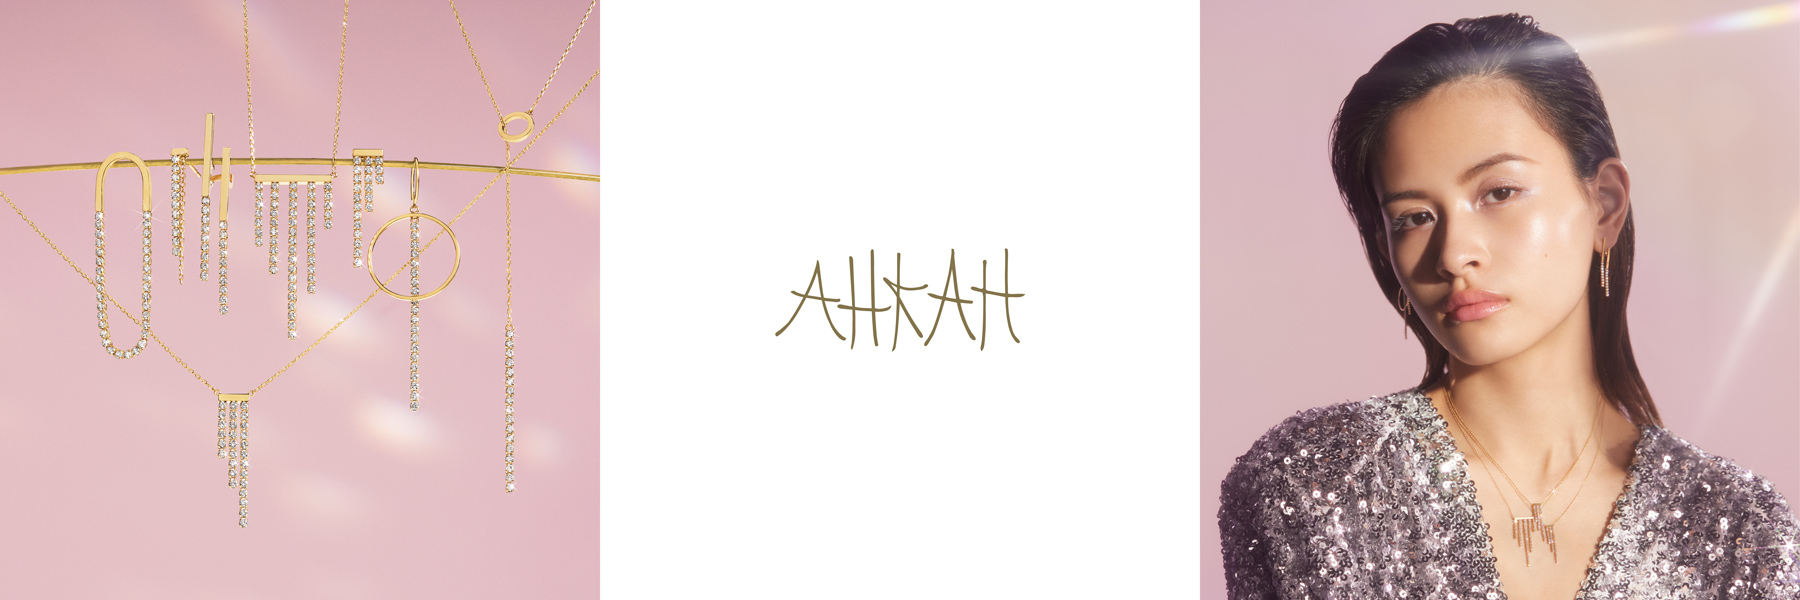 JEWELRY | AHKAH official site